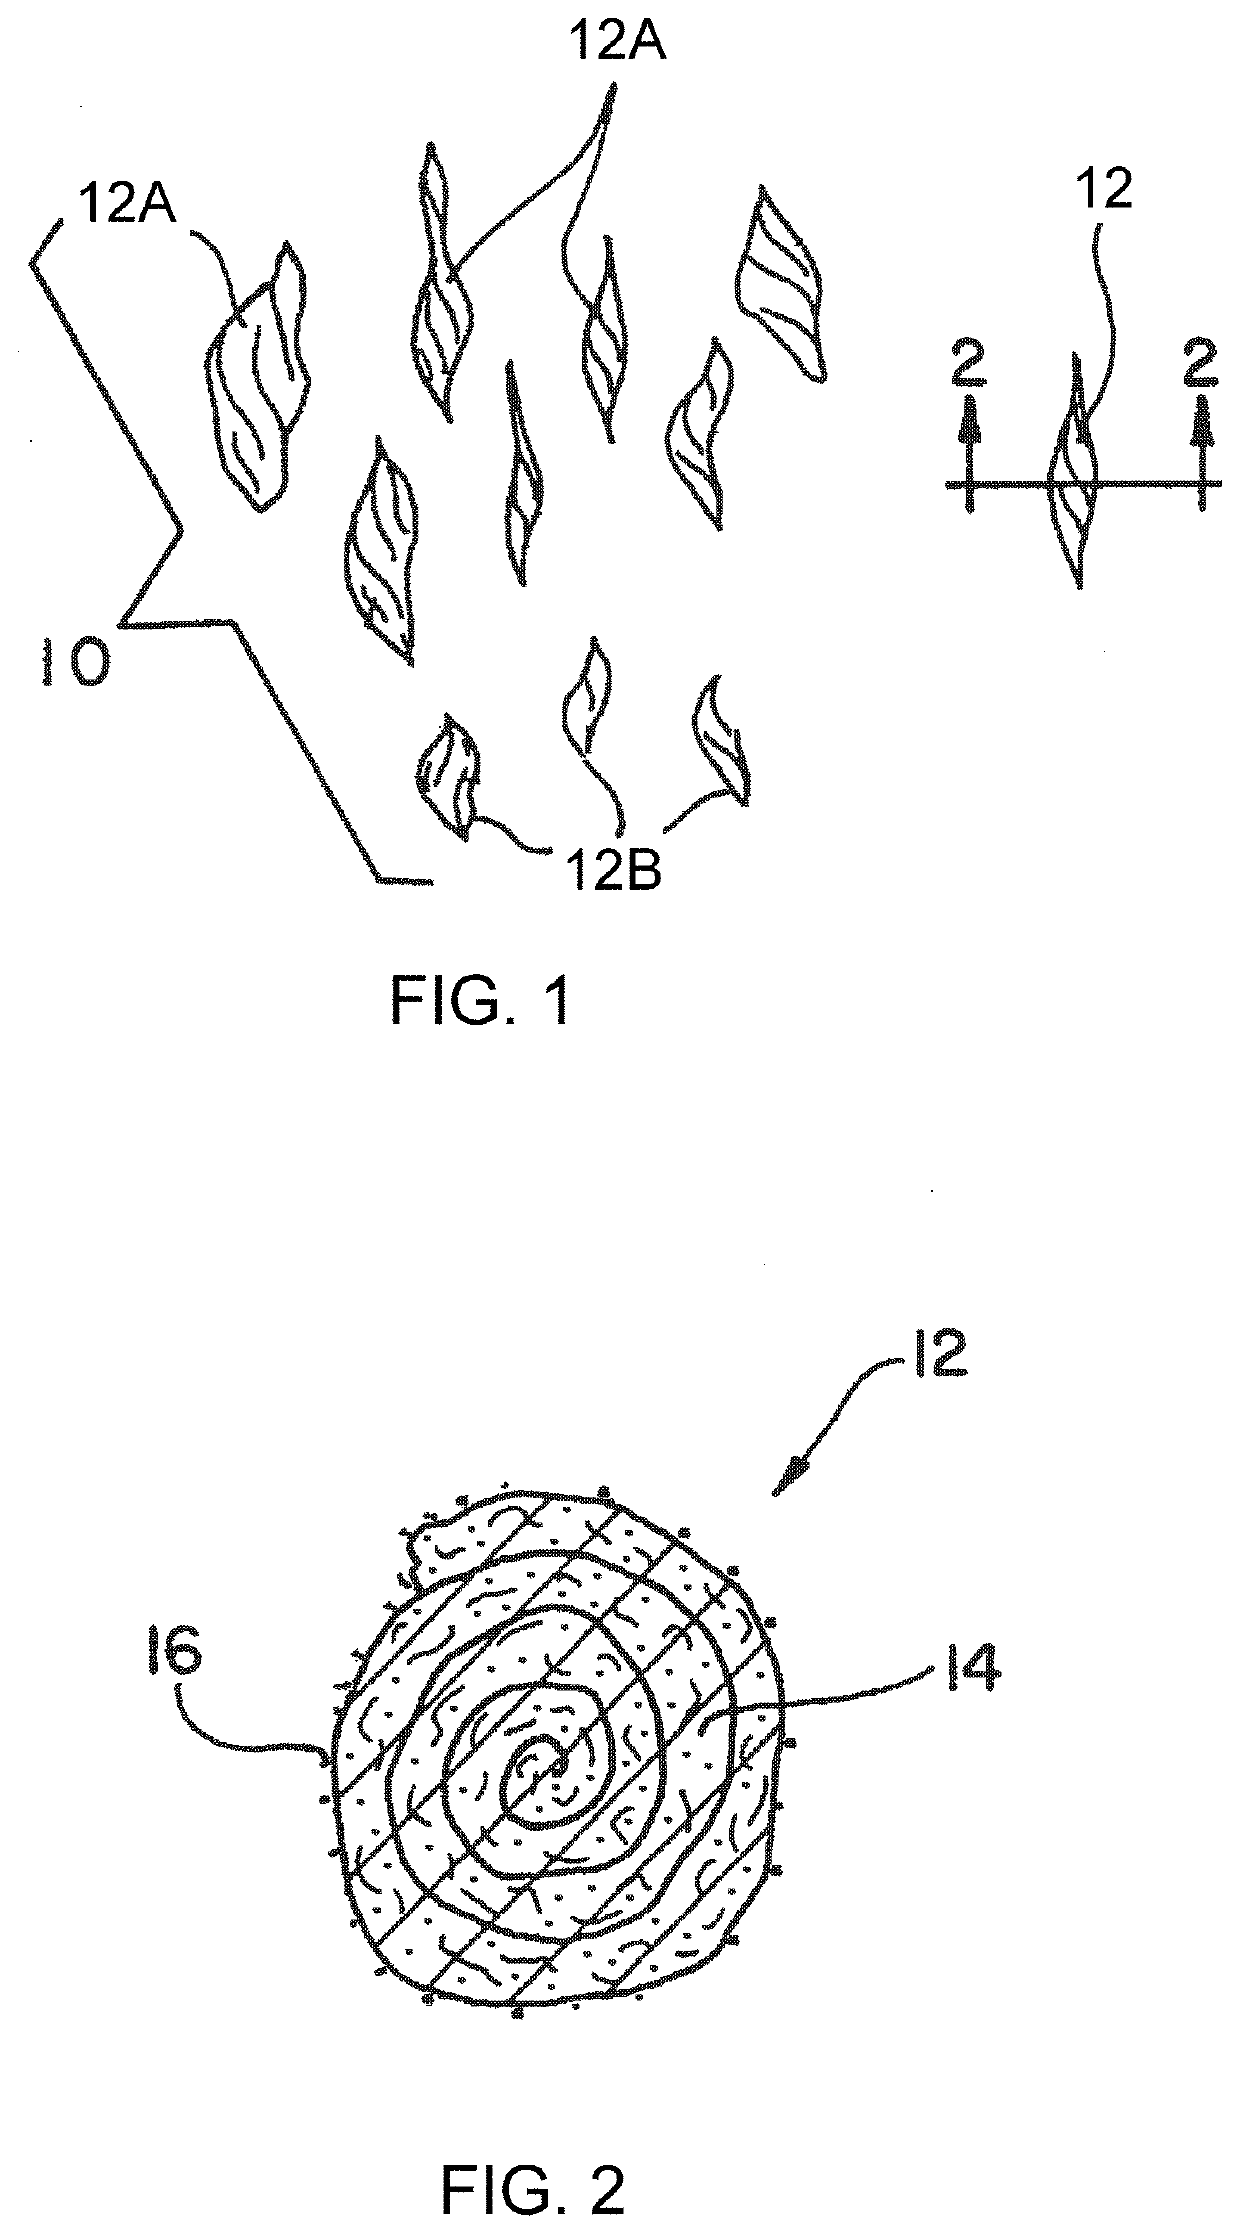 Materials suitable as substitutes for peat mosses and processes and apparatus therefor